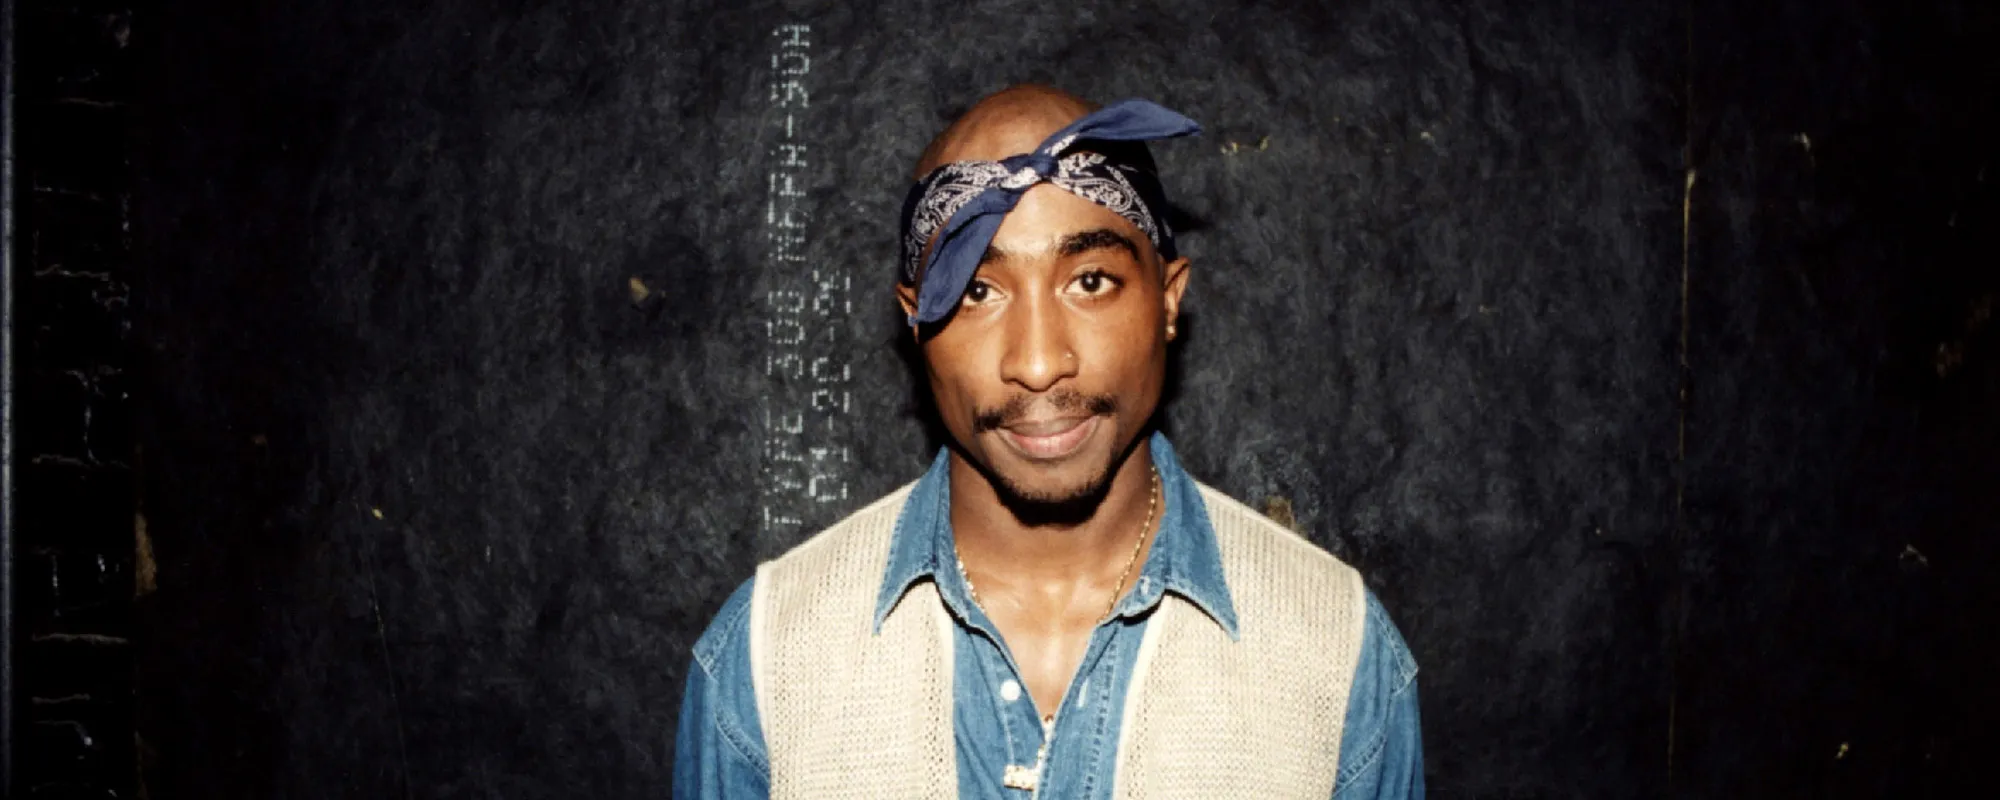 The Story Behind Tupac’s “To Live & Die in L.A.”